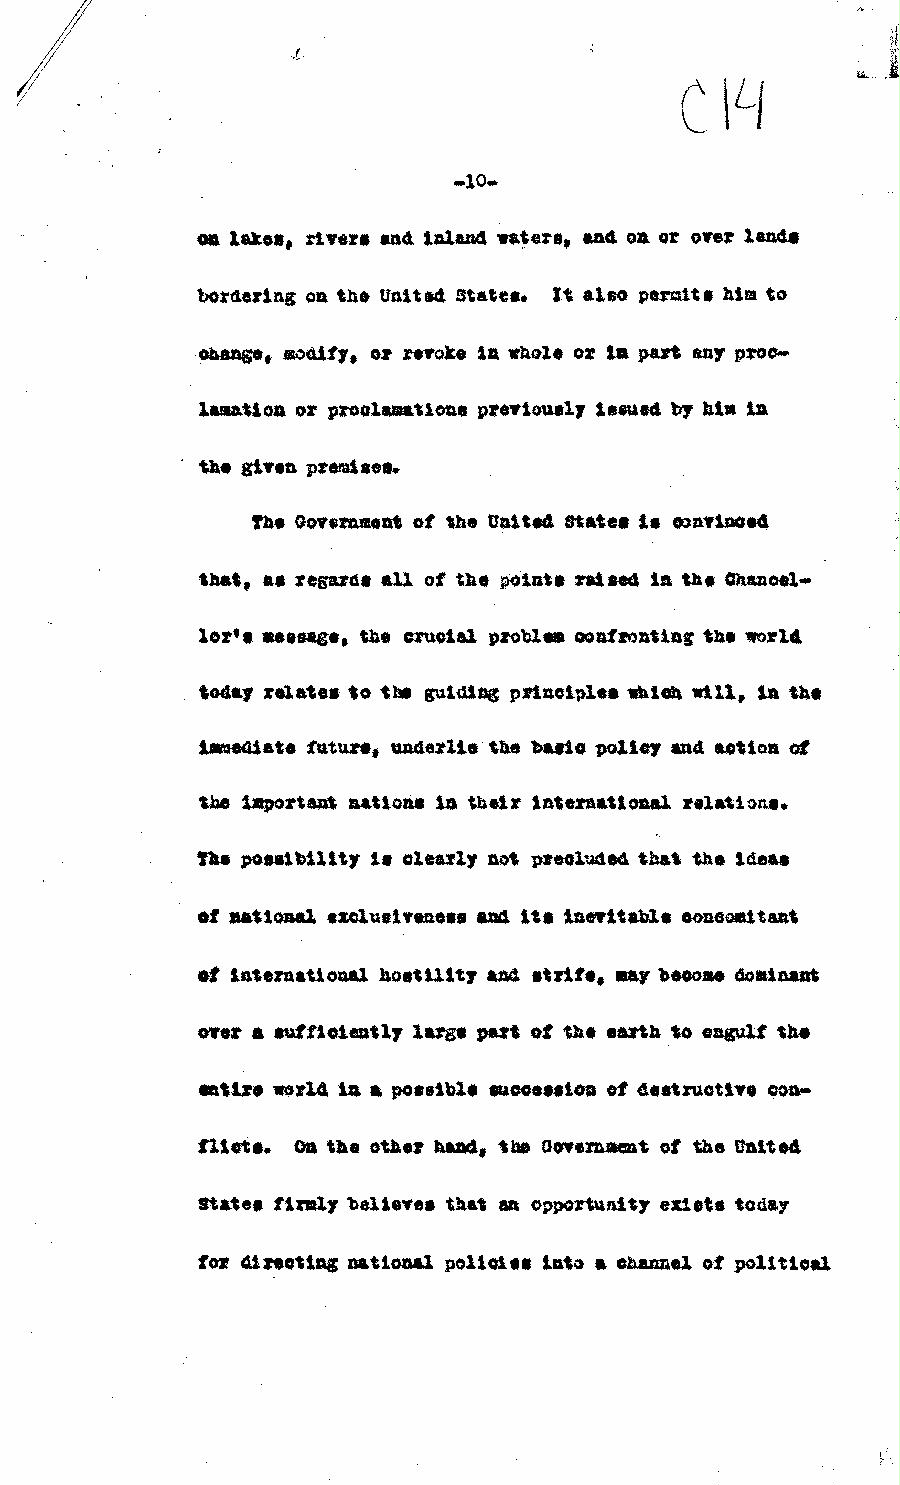 [a303c14.jpg] - Cont-memo from Dept. of State5/28/37